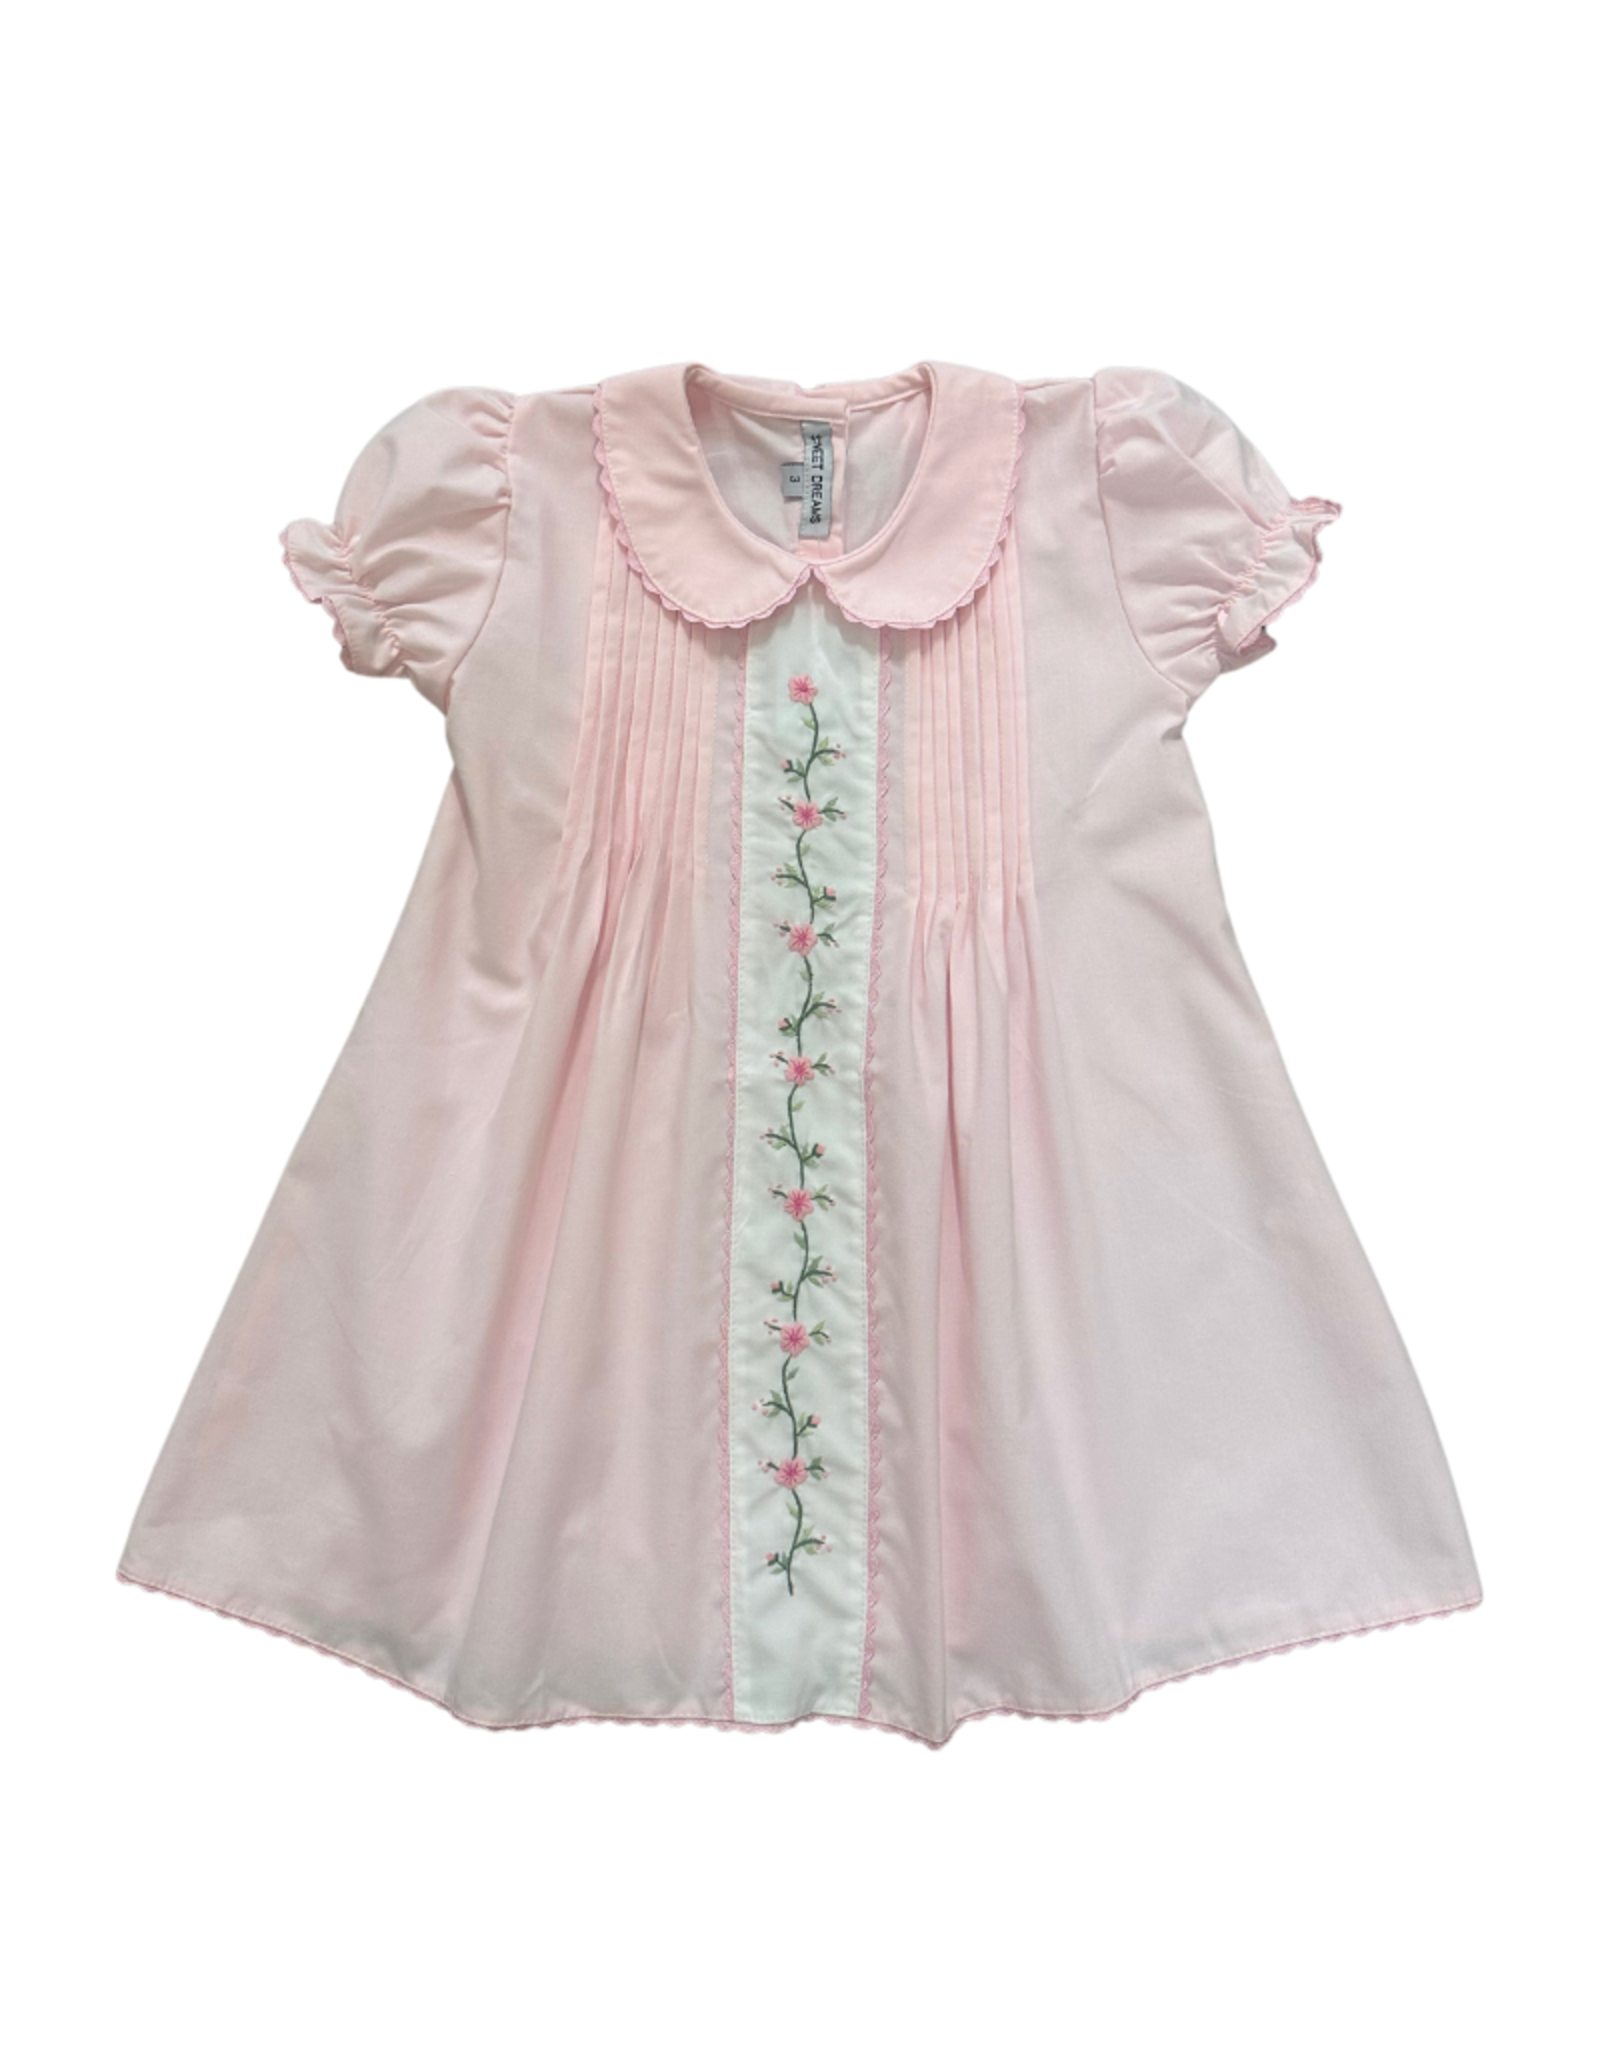 Sweet Dreams Pink Embroidered Cherry Blossom Dress